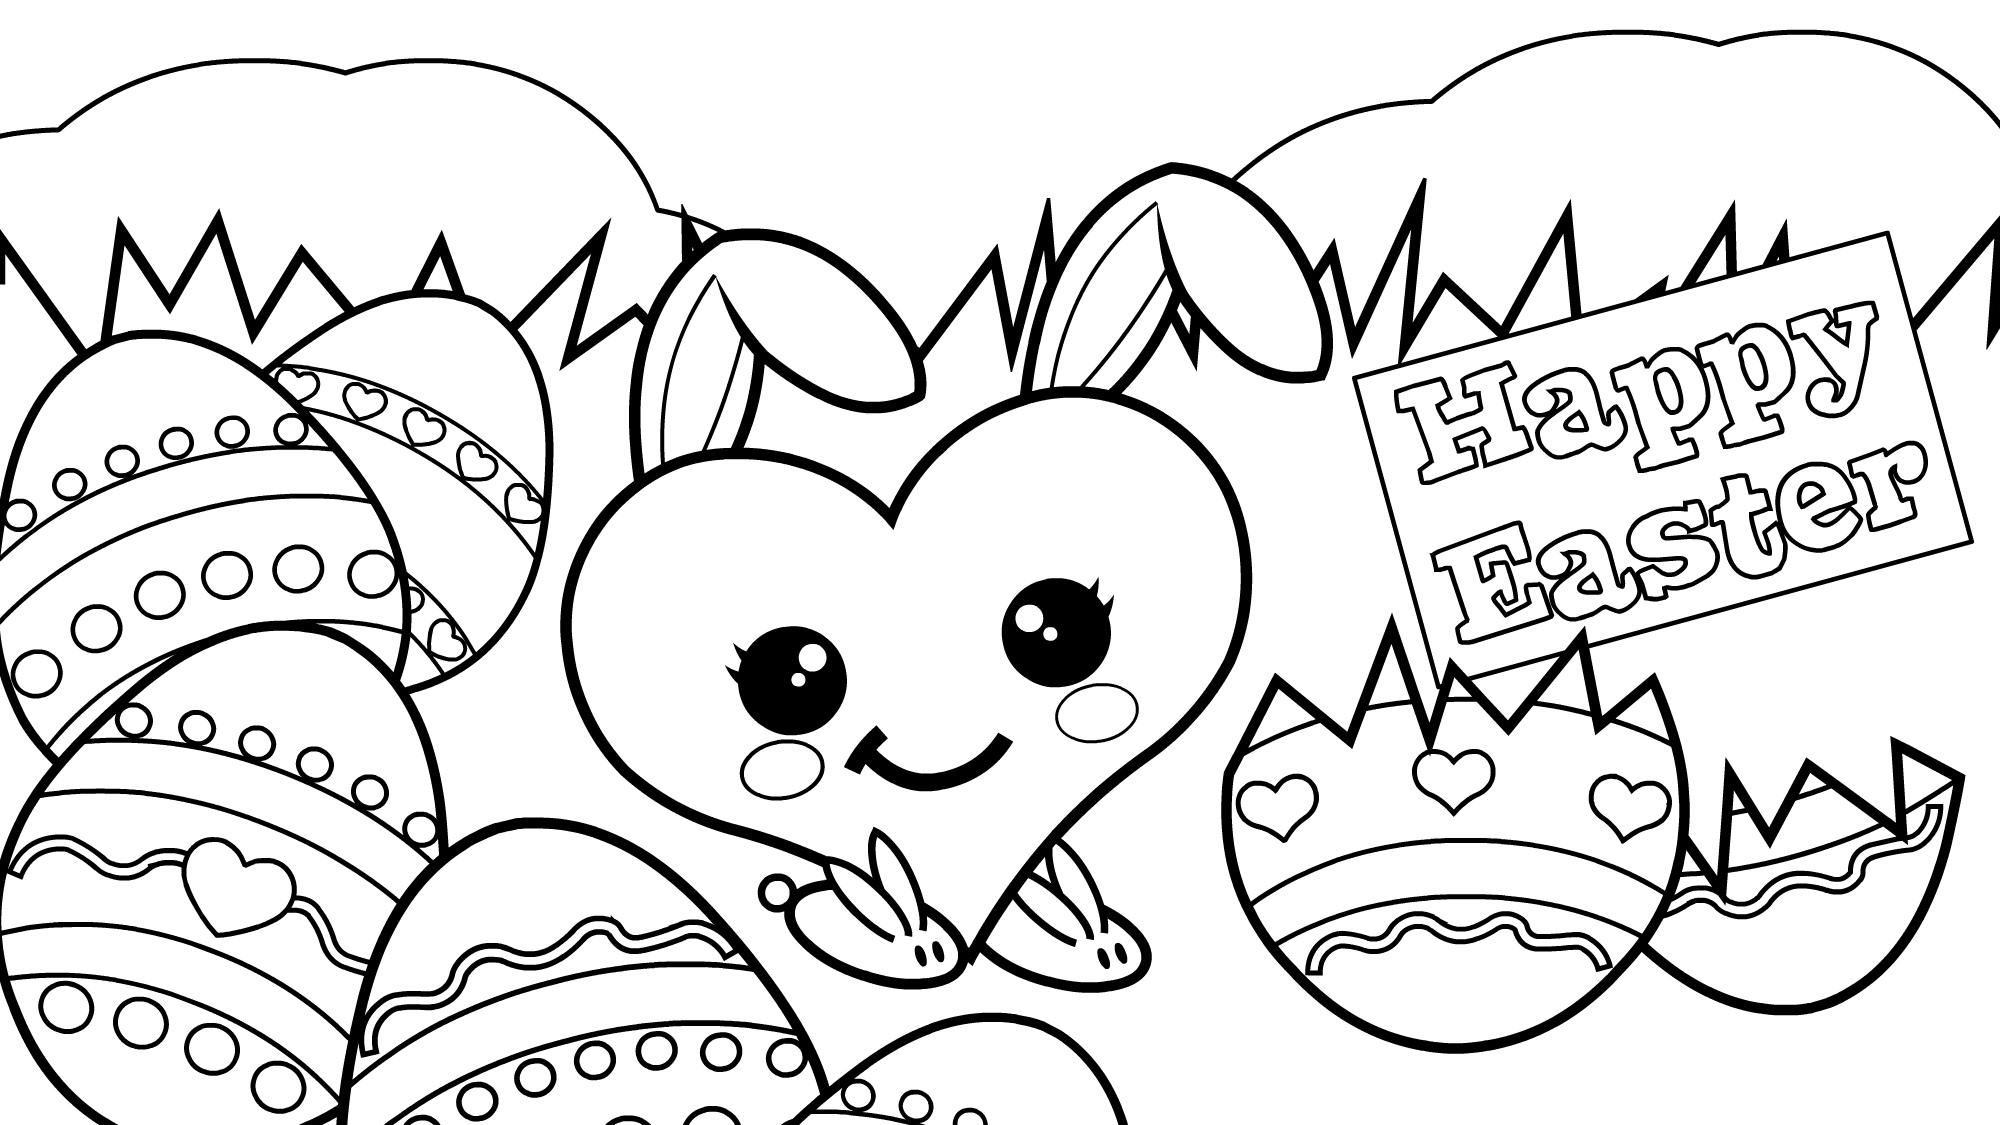 Easter Egg Coloring Page (19 Pictures) - Colorine.net | 7274